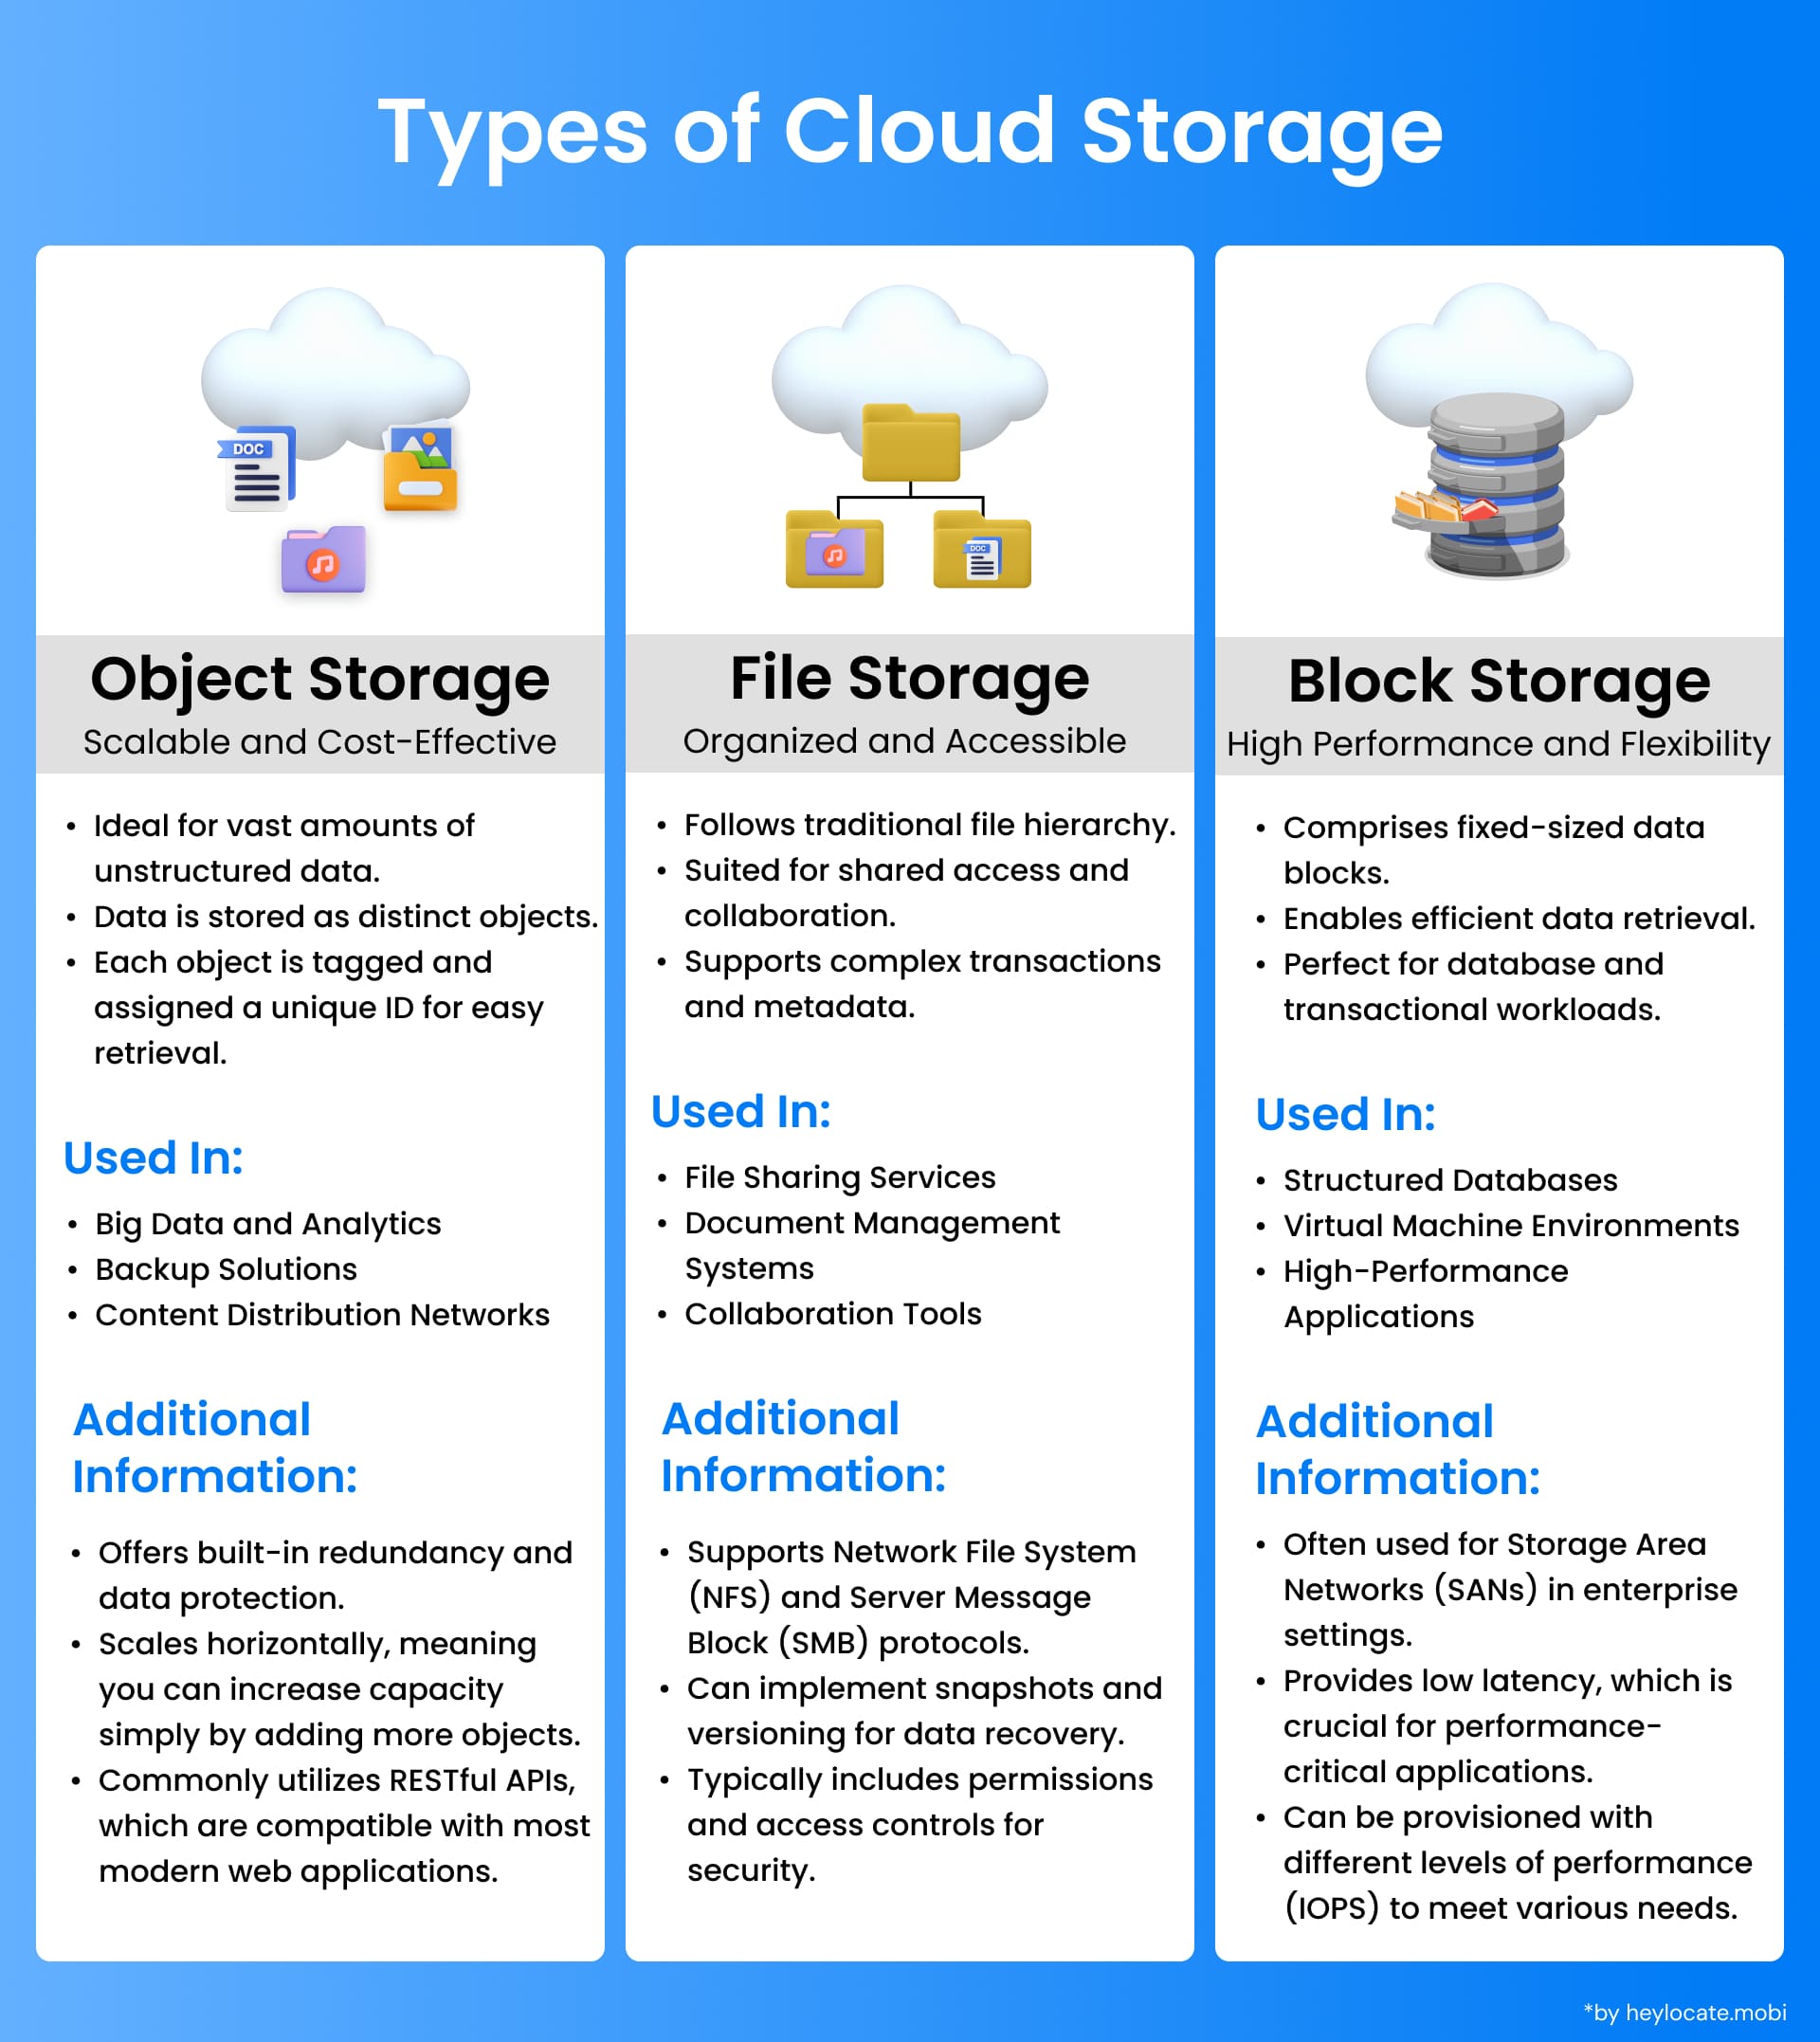 An infographic explaining the three types of cloud storage: Object Storage, File Storage, and Block Storage. Detailing their uses, benefits, and common applications